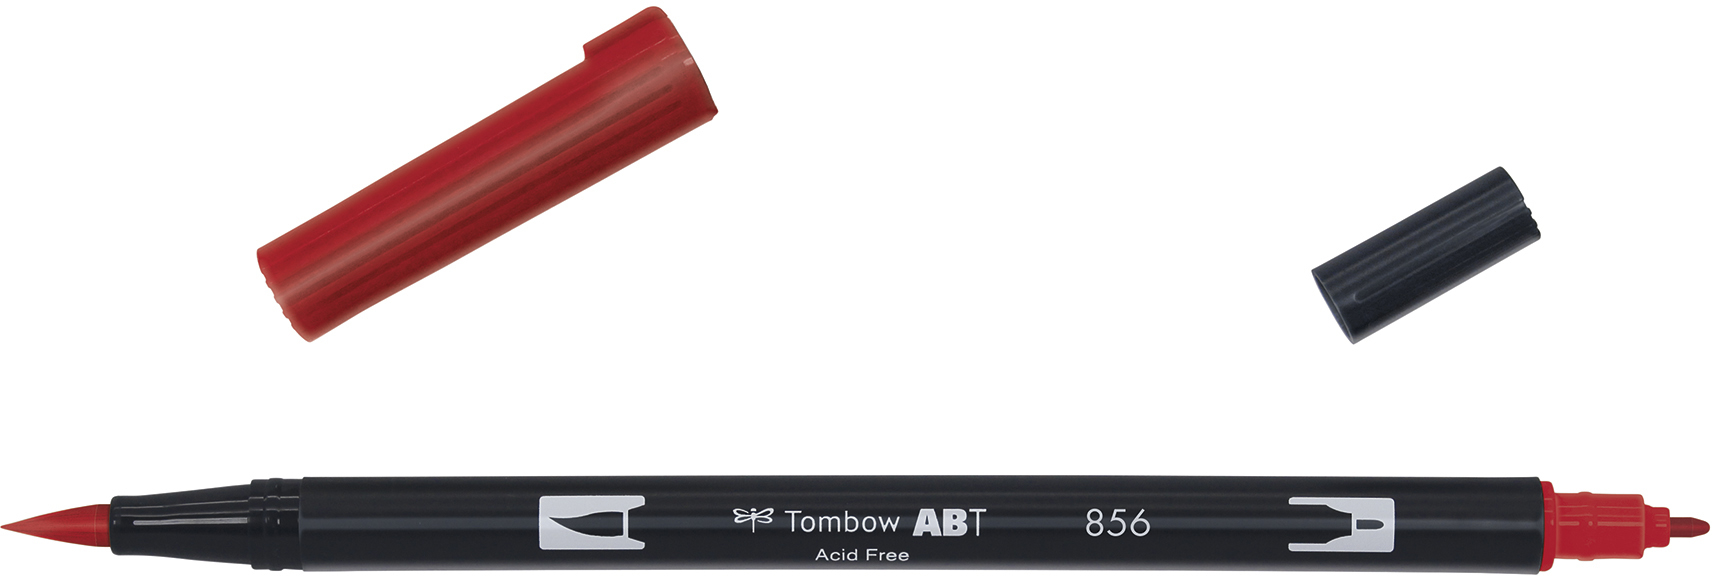 TOMBOW Dual Brush Pen ABT 856 rouge chinoise